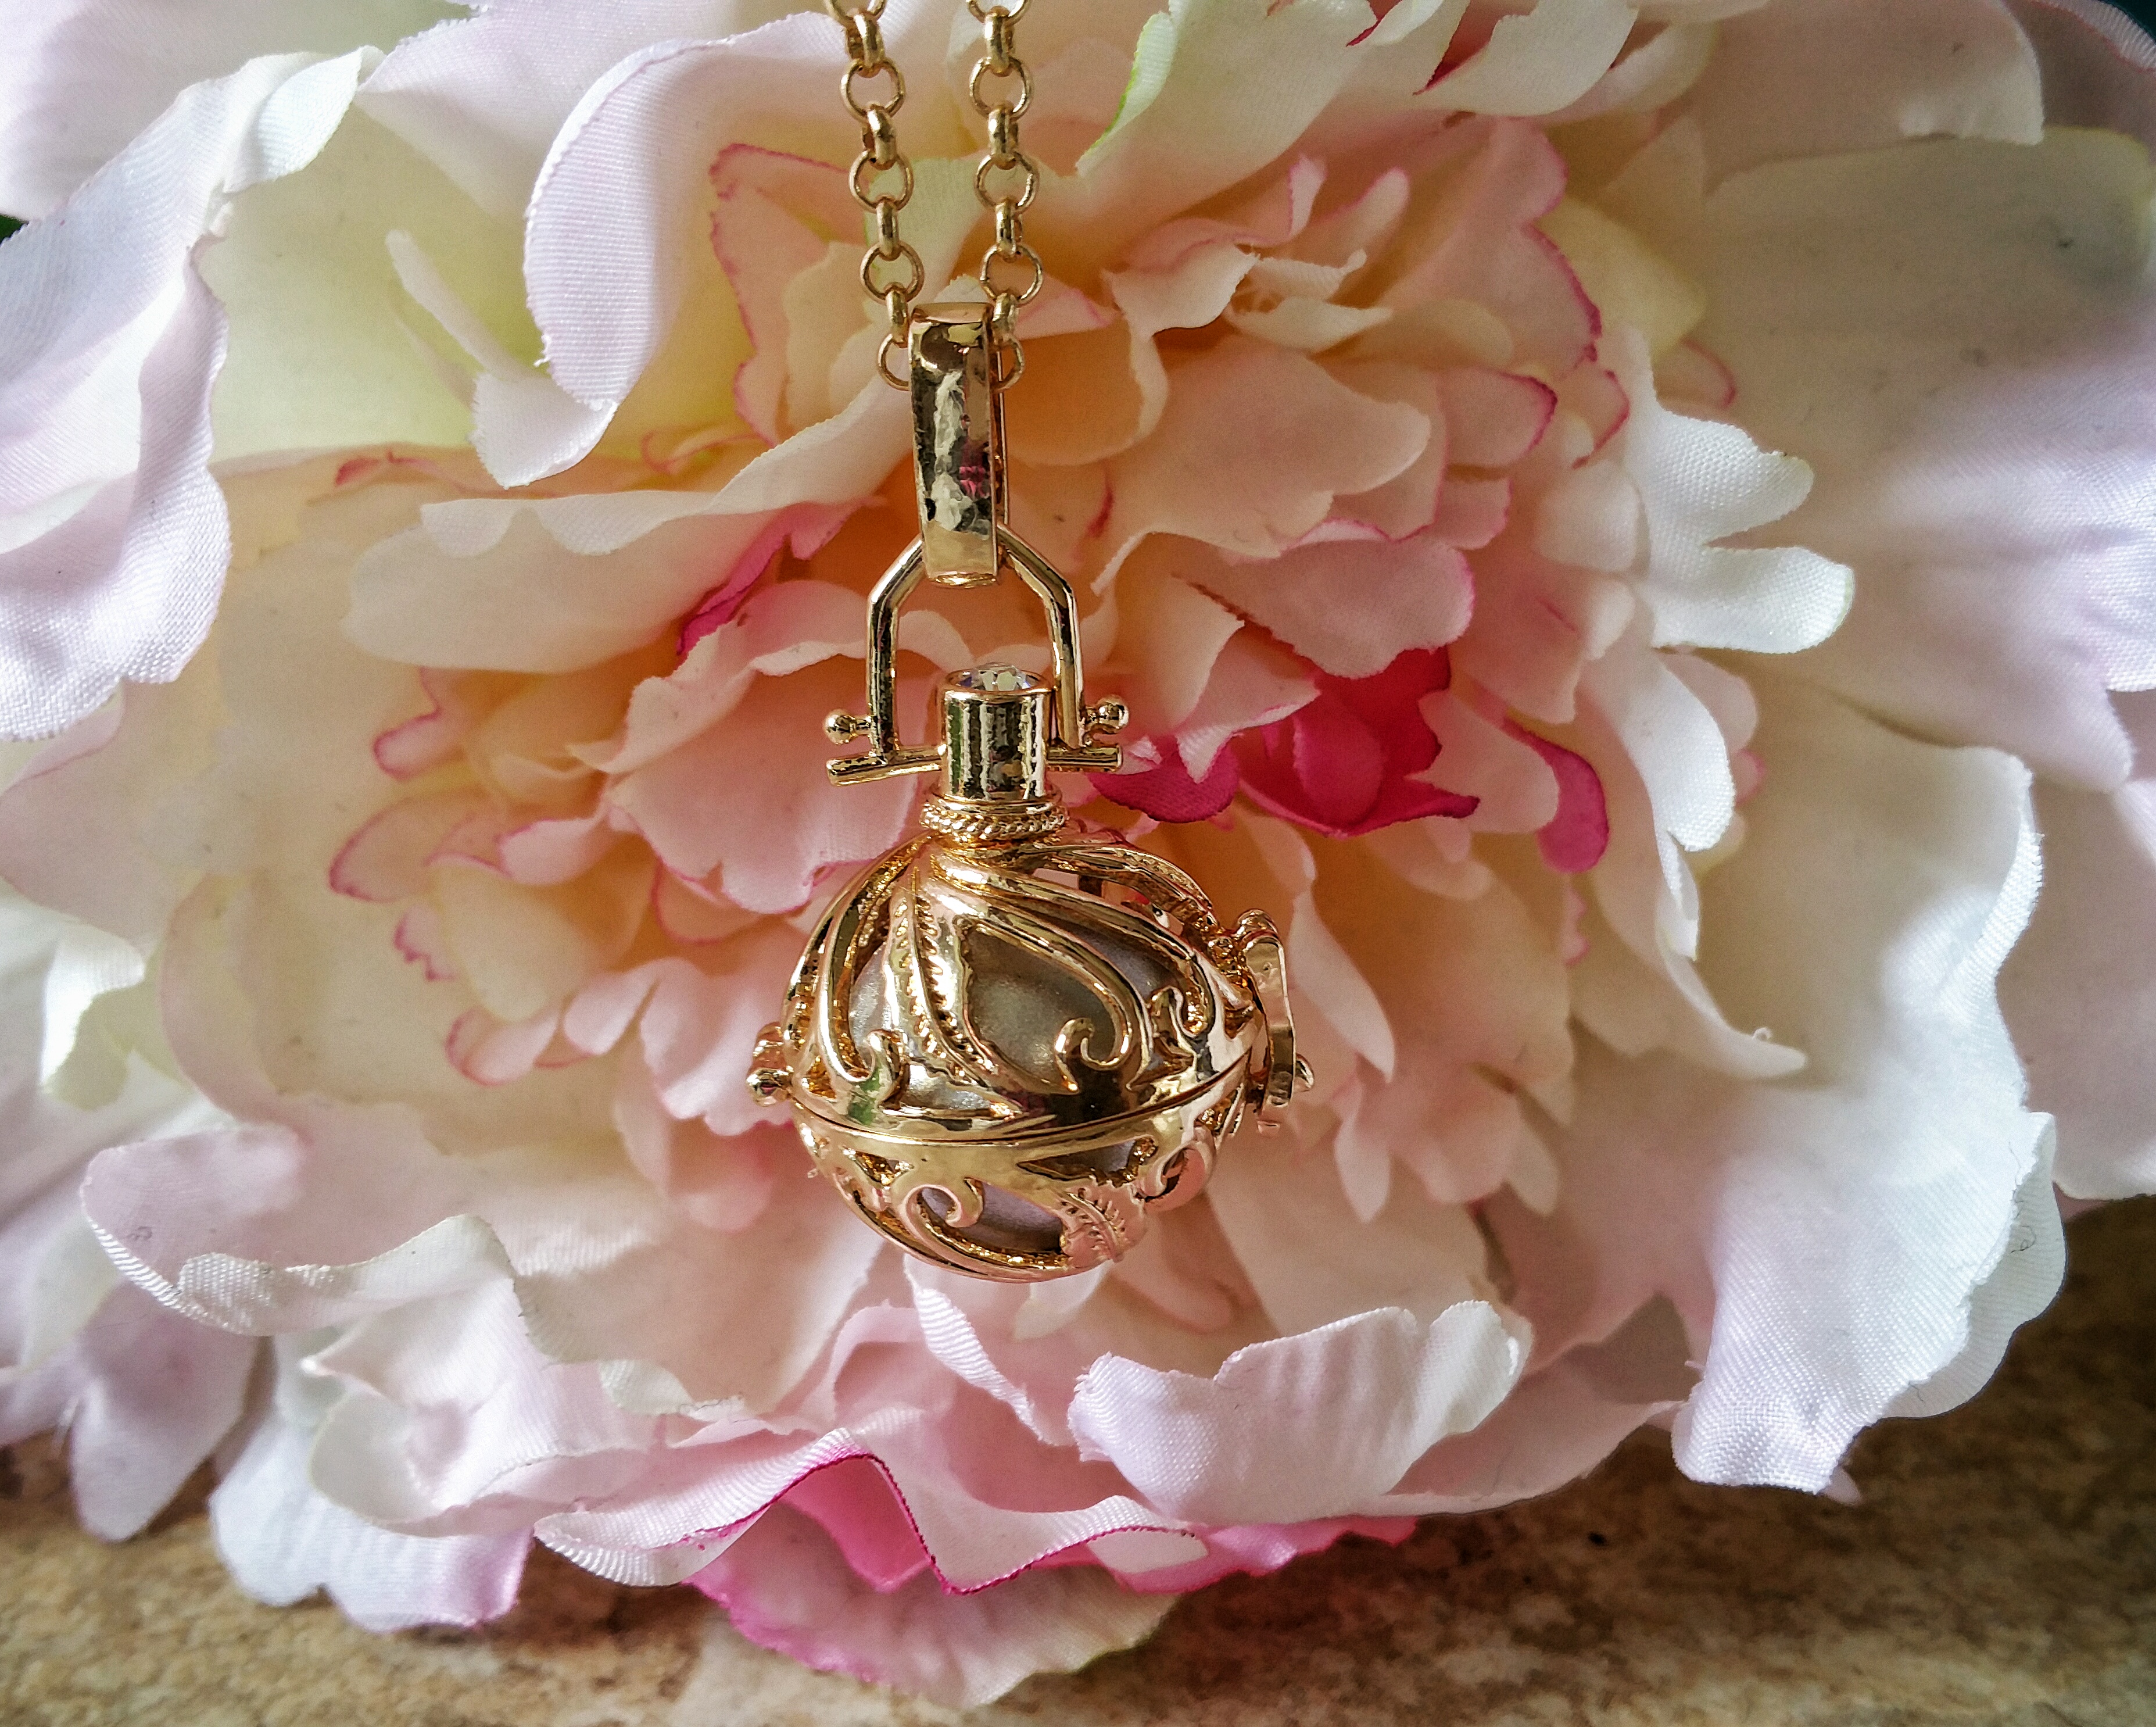 Yourself Expression, Angel Locket, Chime, Guardian Chimes, The grommet, accessory, jewelry, locket, gold, beautiful, fashion, style, jewelry piece, review, 